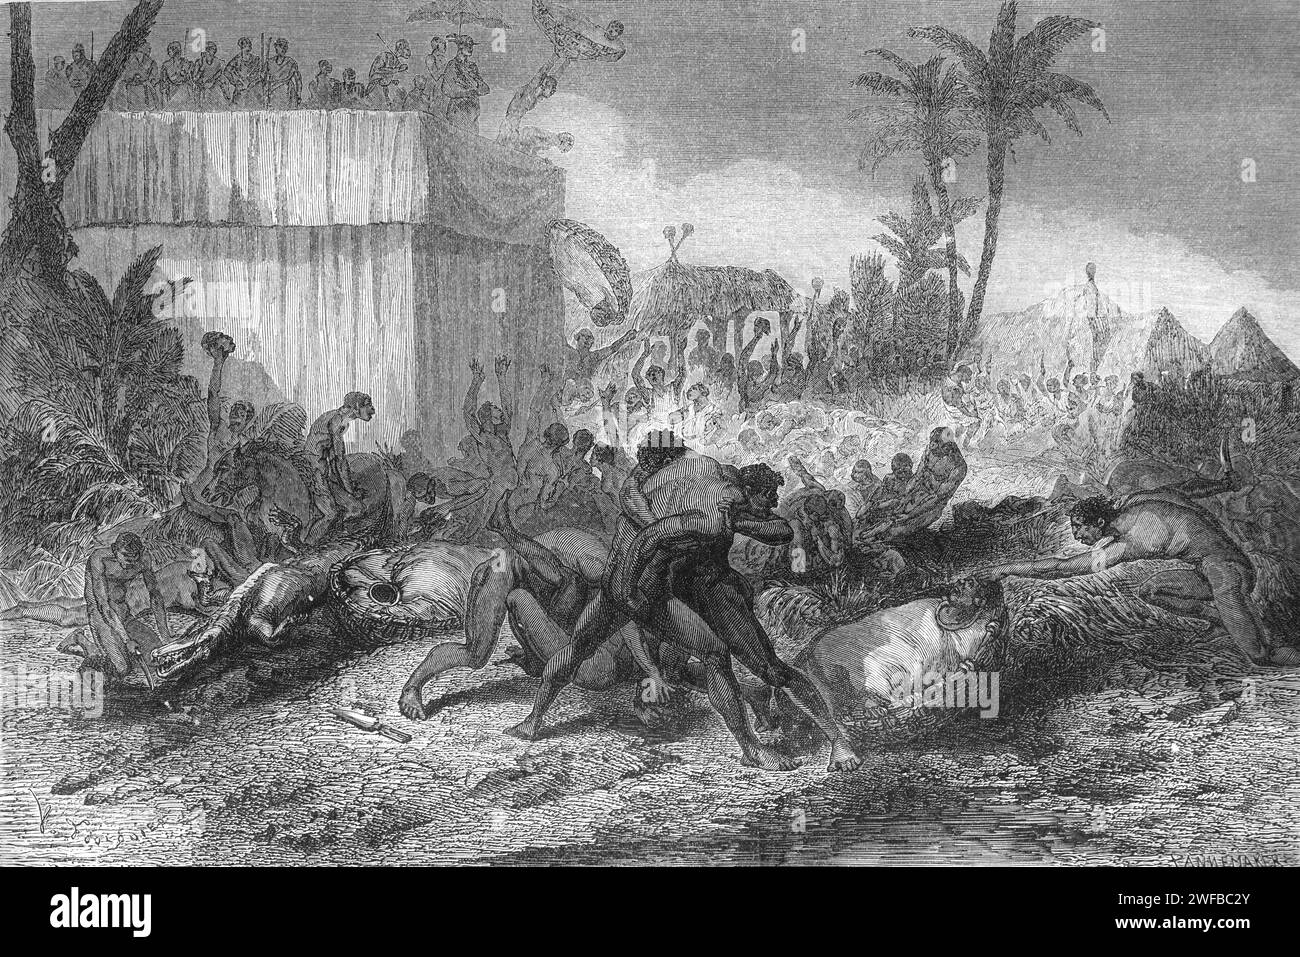 Fighting over Heads of Victims During Tribal Wars and Human Sacrifice and Killings in Kingdom of Dahomey (1600-1904), now Benin, West Africa. Vintage or Historic Engraving or Illustration 1863 Stock Photo